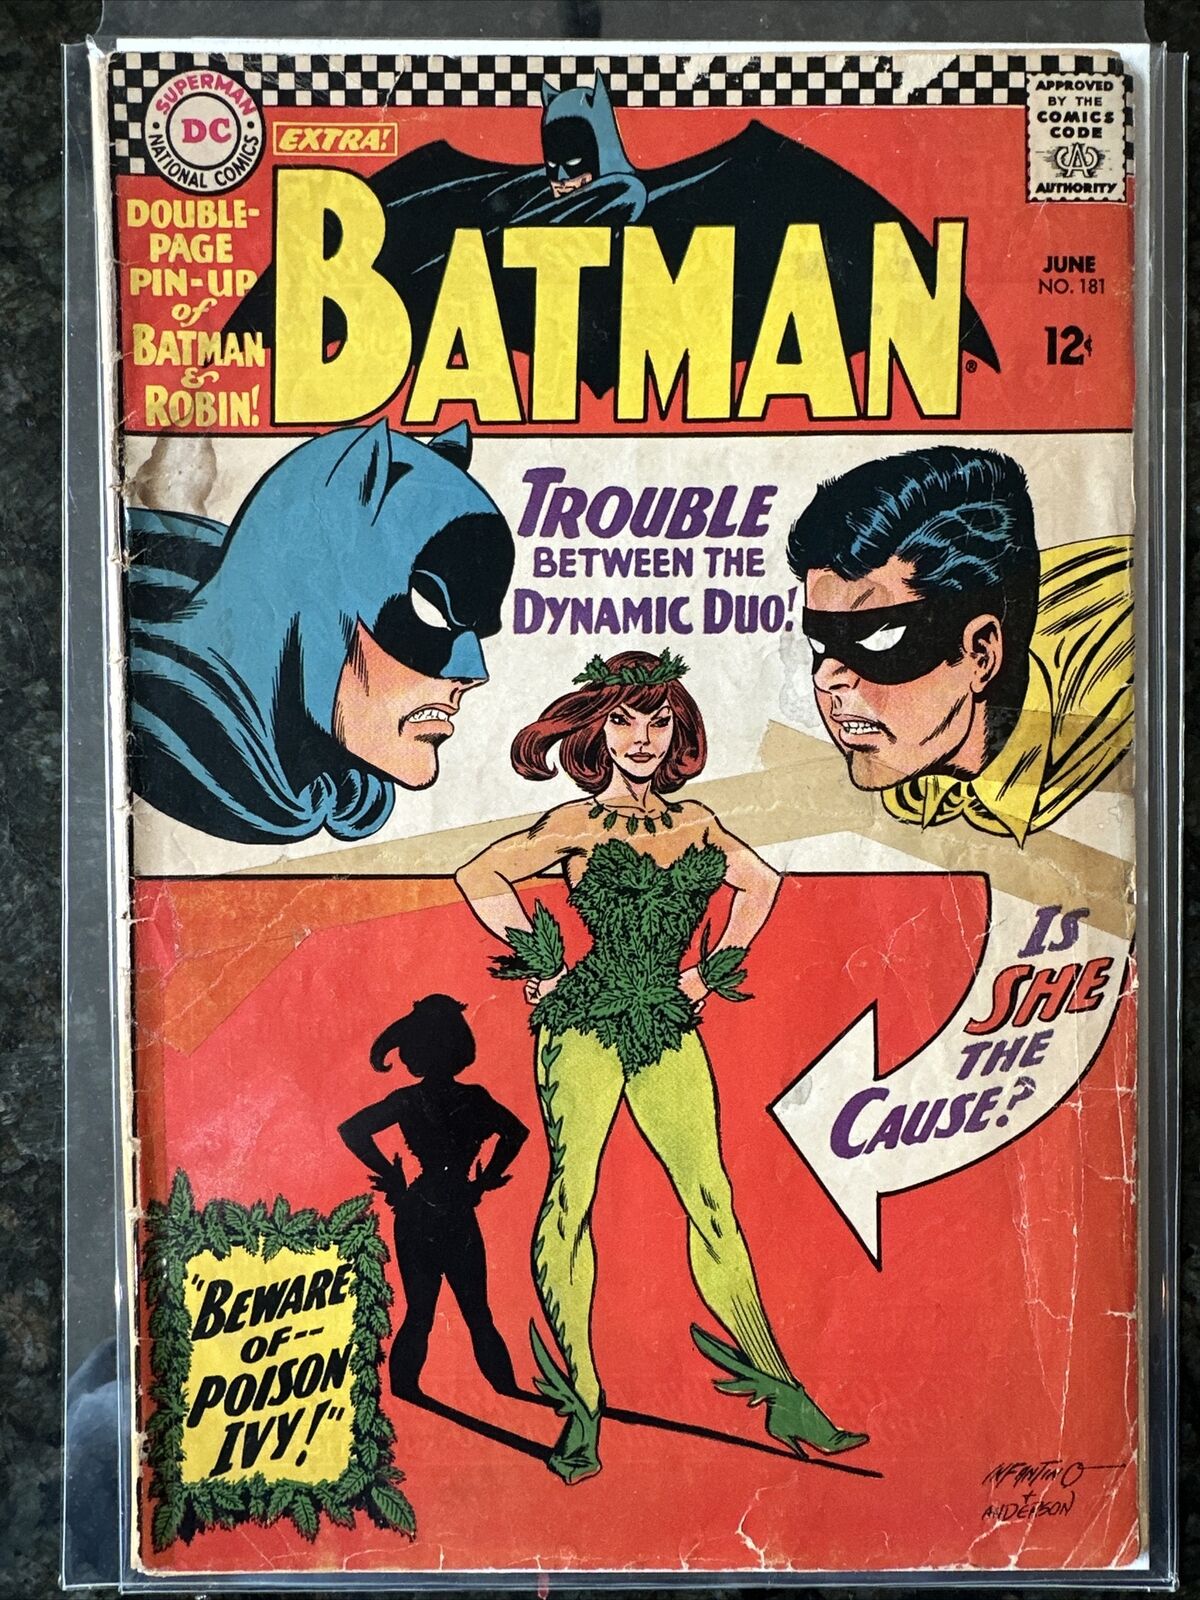 Batman #181 1966 Key DC Comic Book 1st Appearance Of Poison Ivy With Pinup